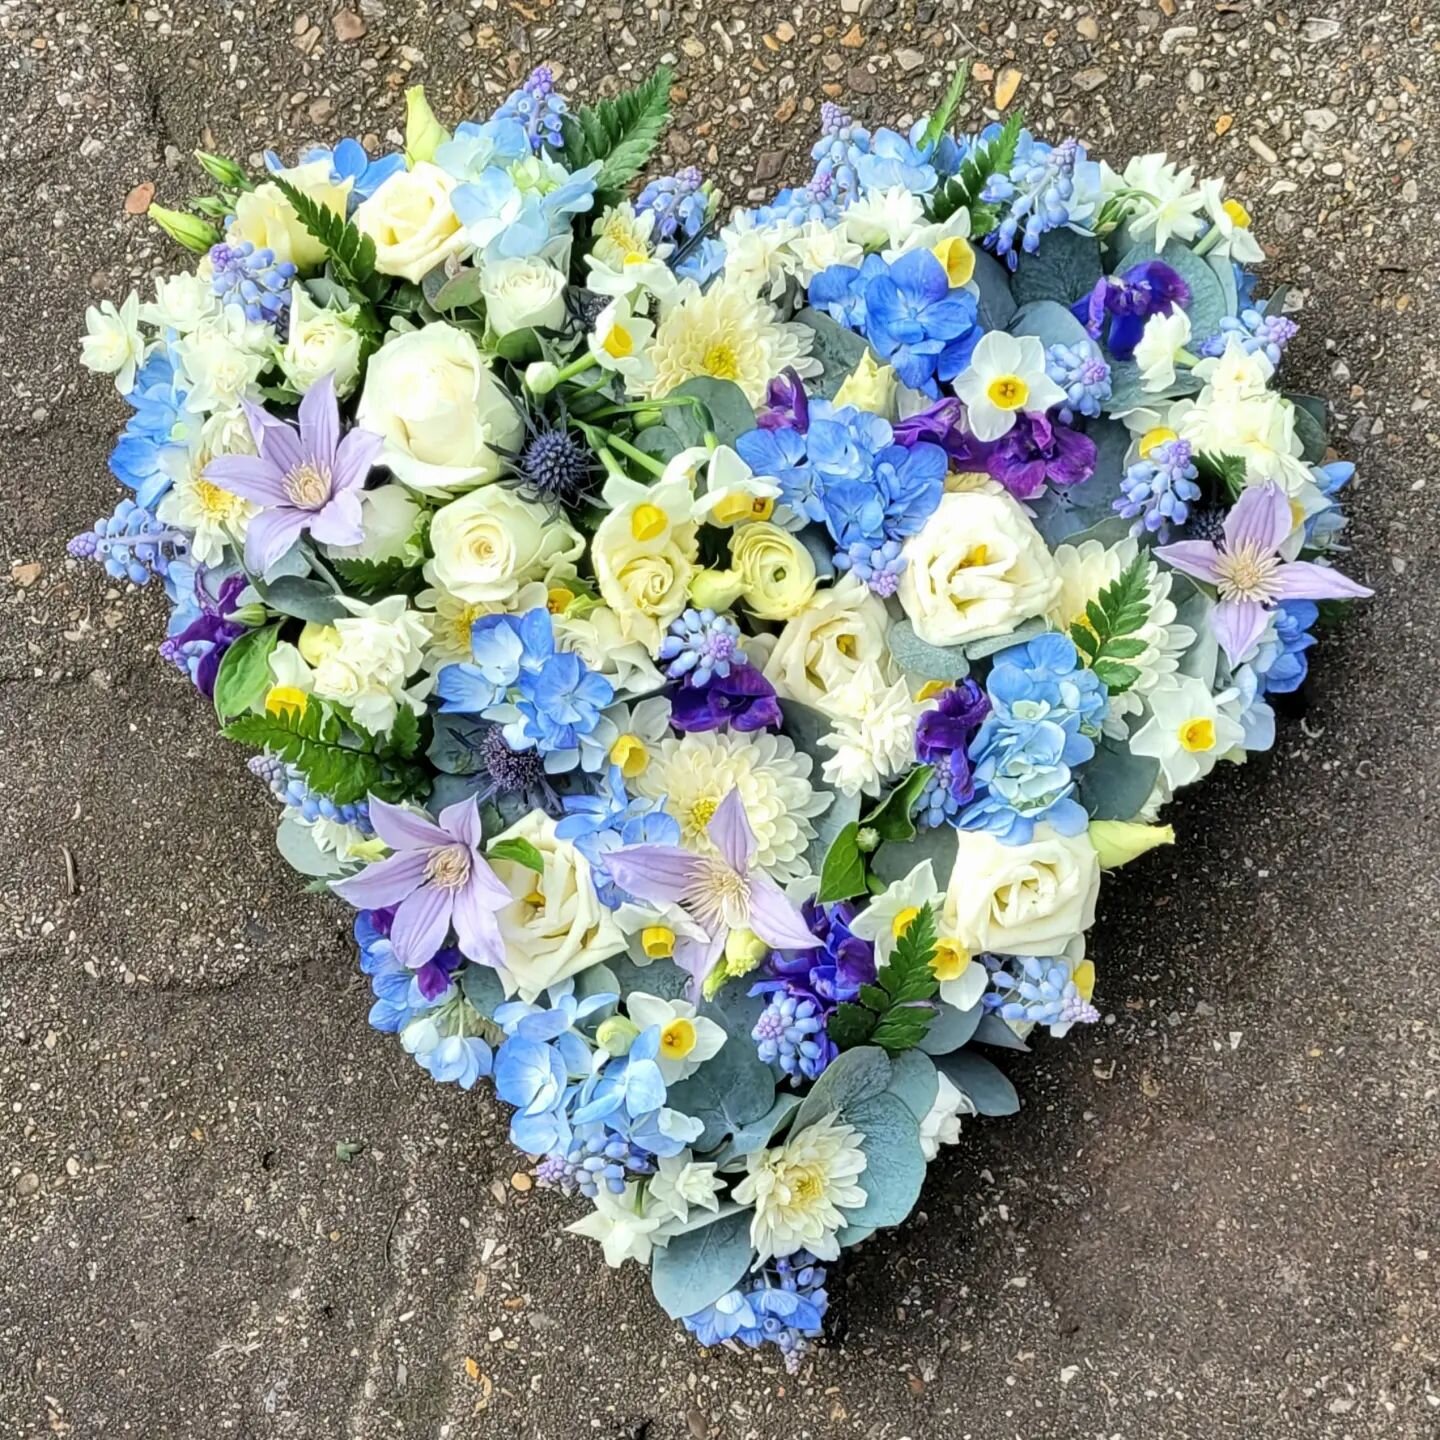 Such beautiful colours in this spring heart made by @theresa.bishop28 for a gentlemans funeral this afternoon #funeralflowers #springblues #farewellflowers #heart